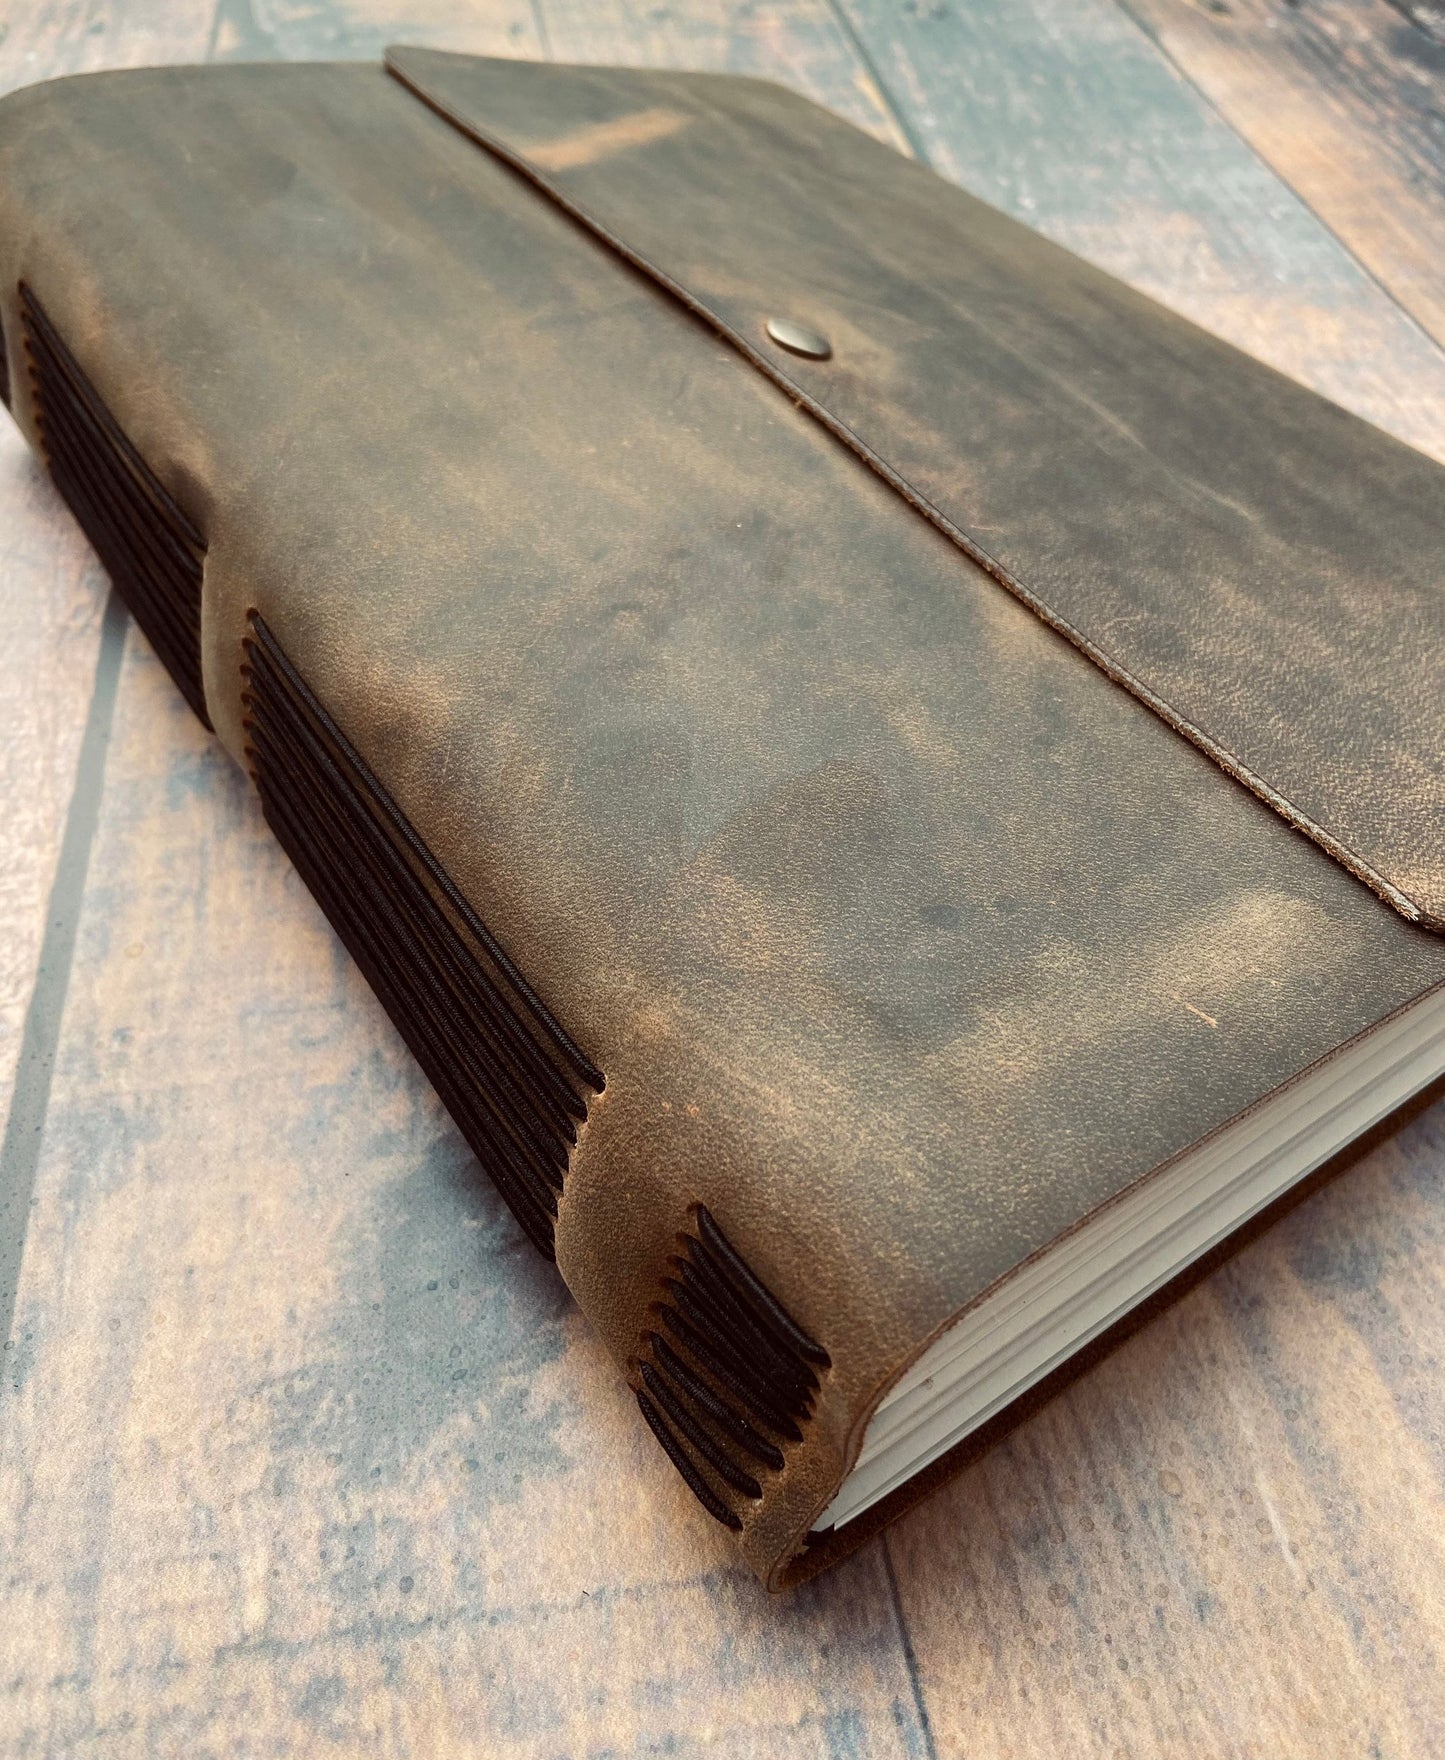 Refillable Leather Journal, Personalized Rustic Writing Diary, Sketch / Watercolor Book, Full Grain Premium Leather Bound, Customizable